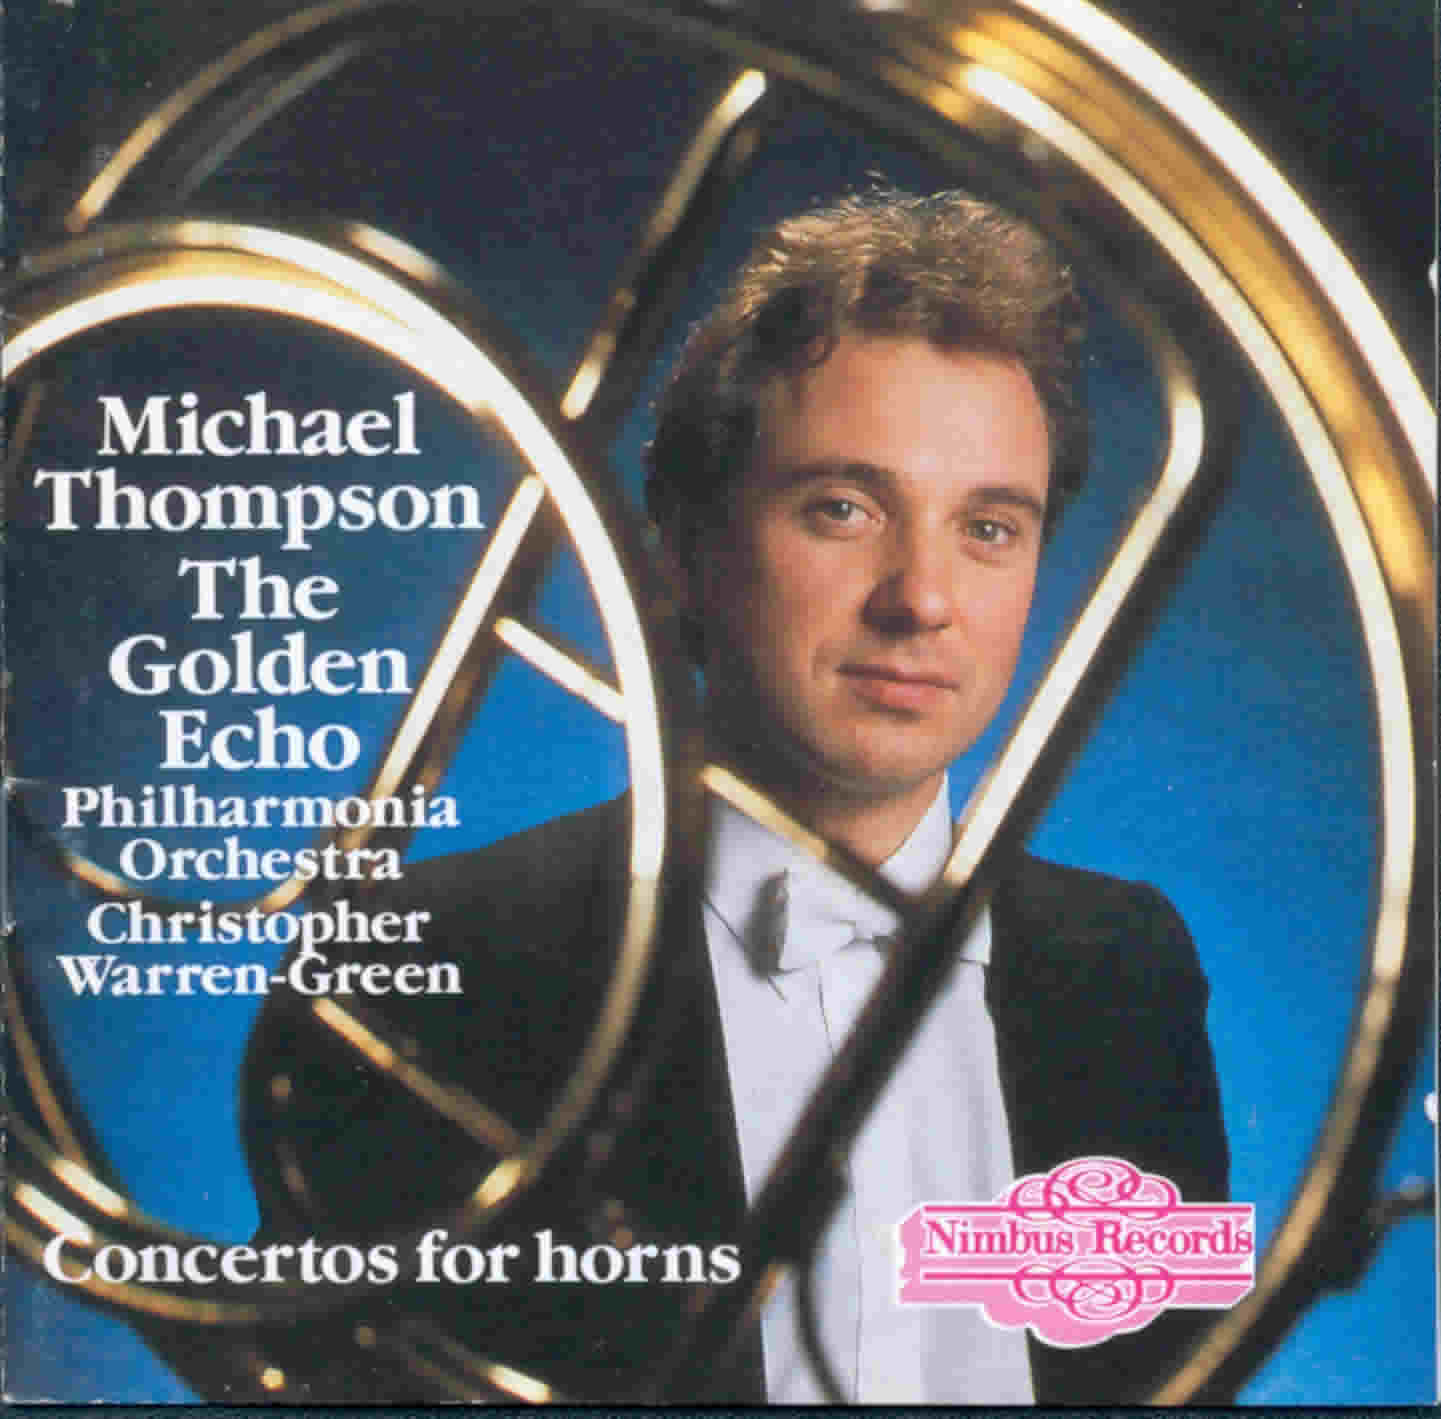 Image of Michael Thompson on the CD cover
for The Golden Echo CD